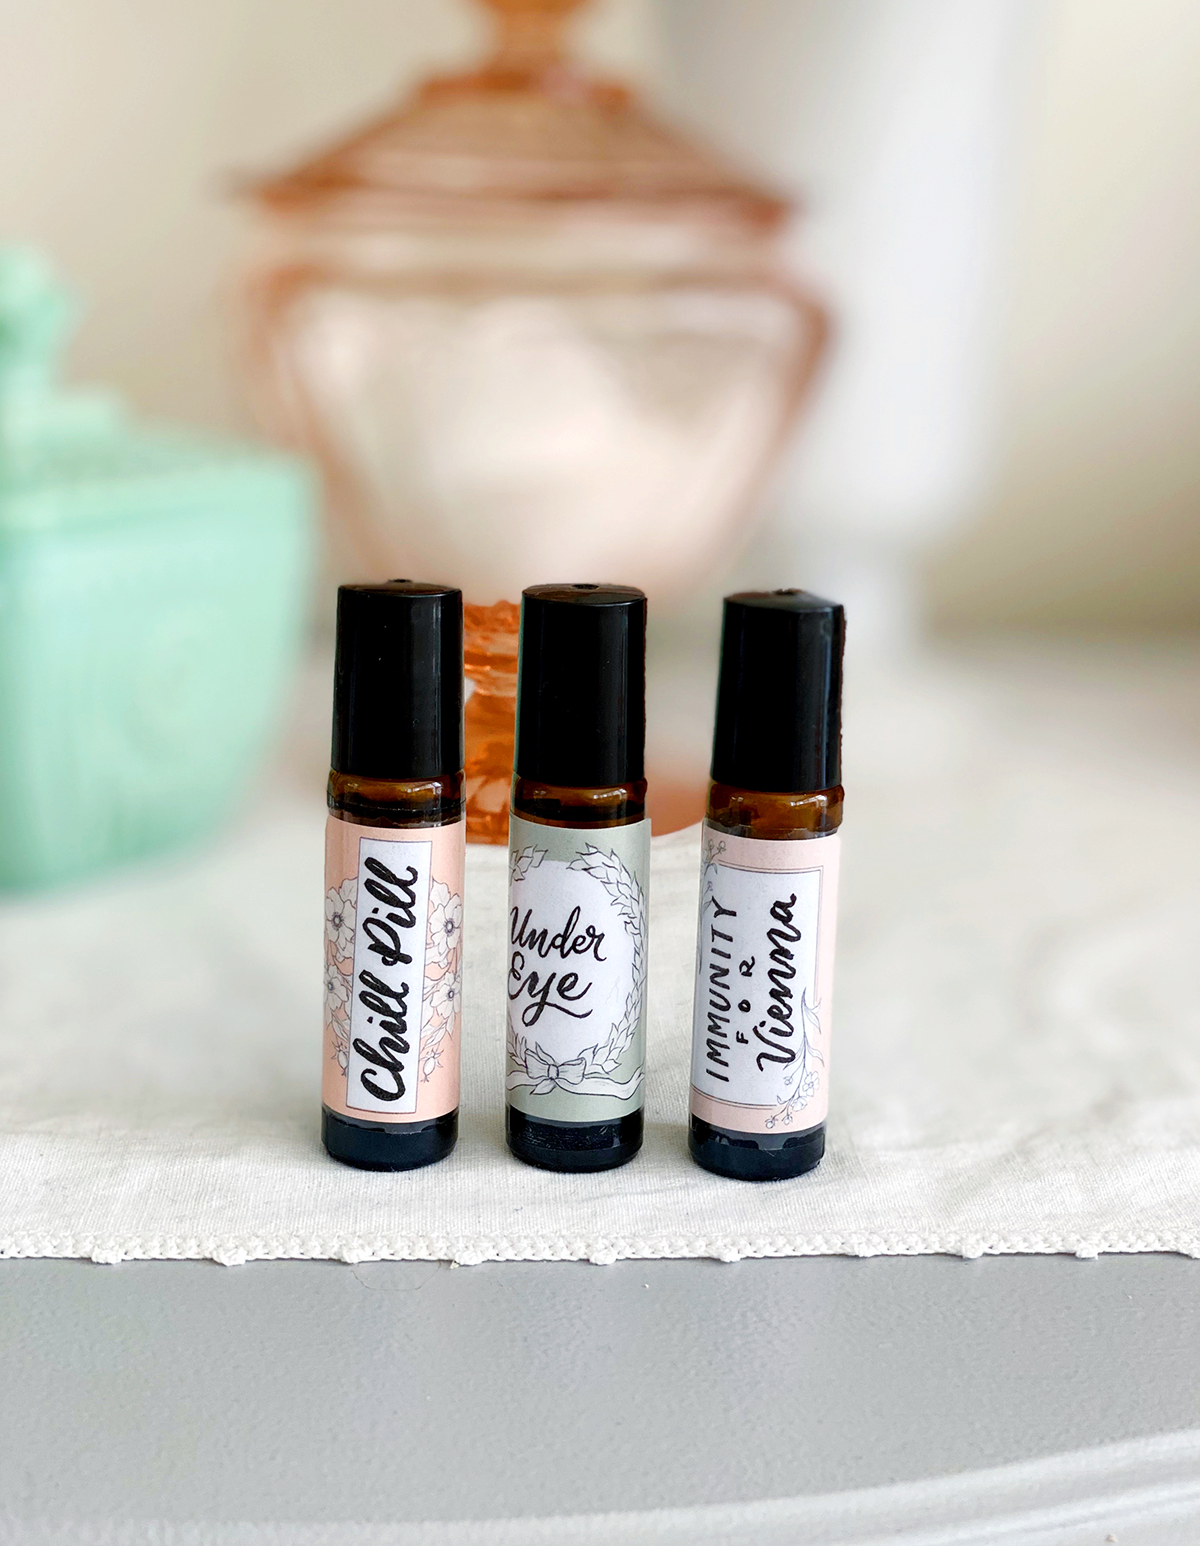 Free Printable Roll-On and Spray Bottle Labels for Essential Oils